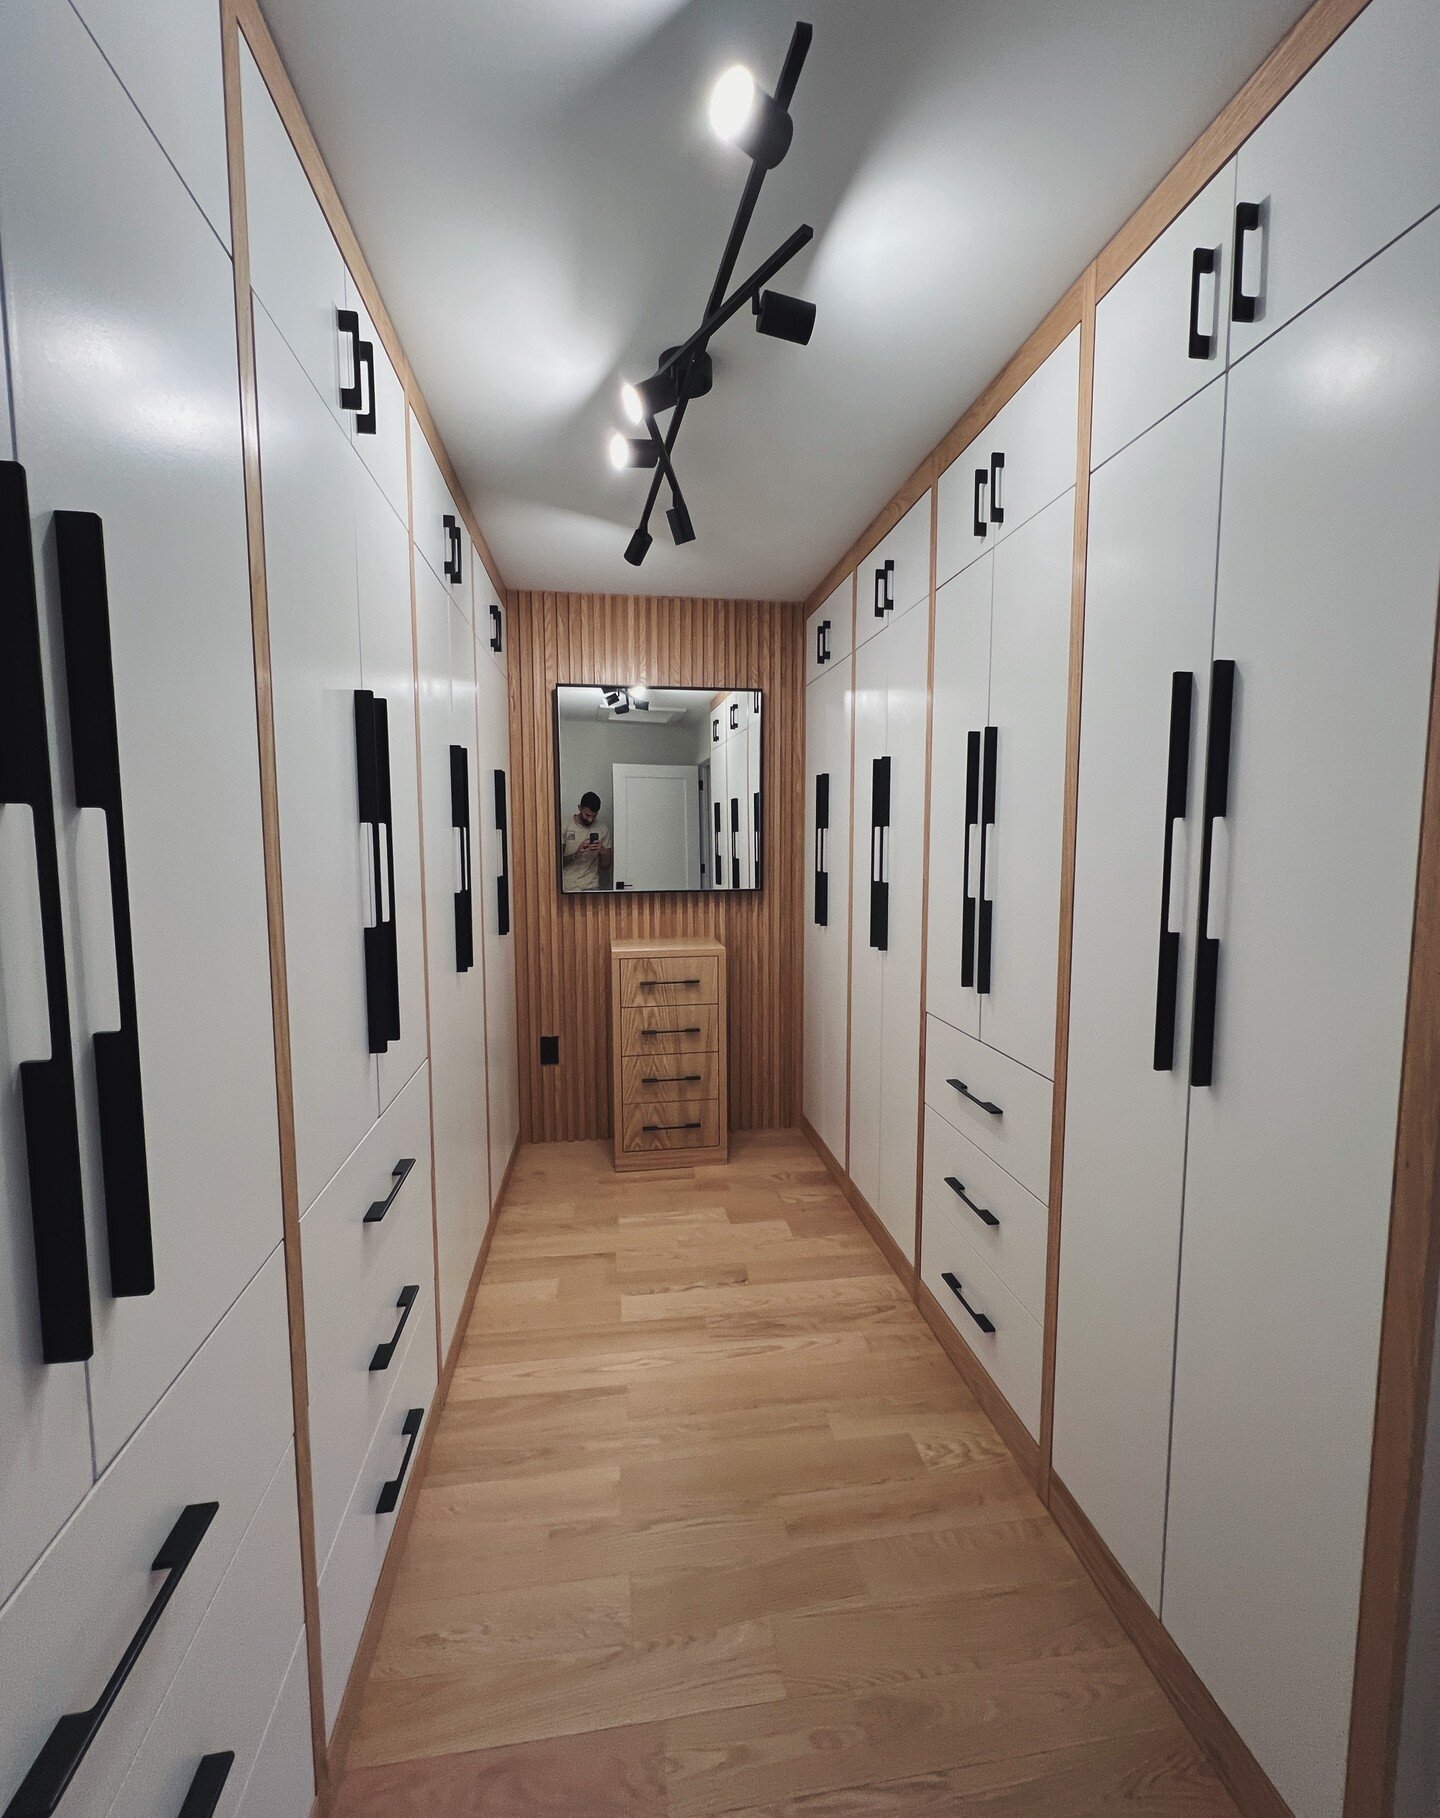 Presenting the completed master walk-in closet featuring oak gables and MDF cabinetry! On the back end, we opted for an oak slat design, and the small drawers are designed to provide full access to the side closet doors. 

#MasterCloset #ClosetGoals 